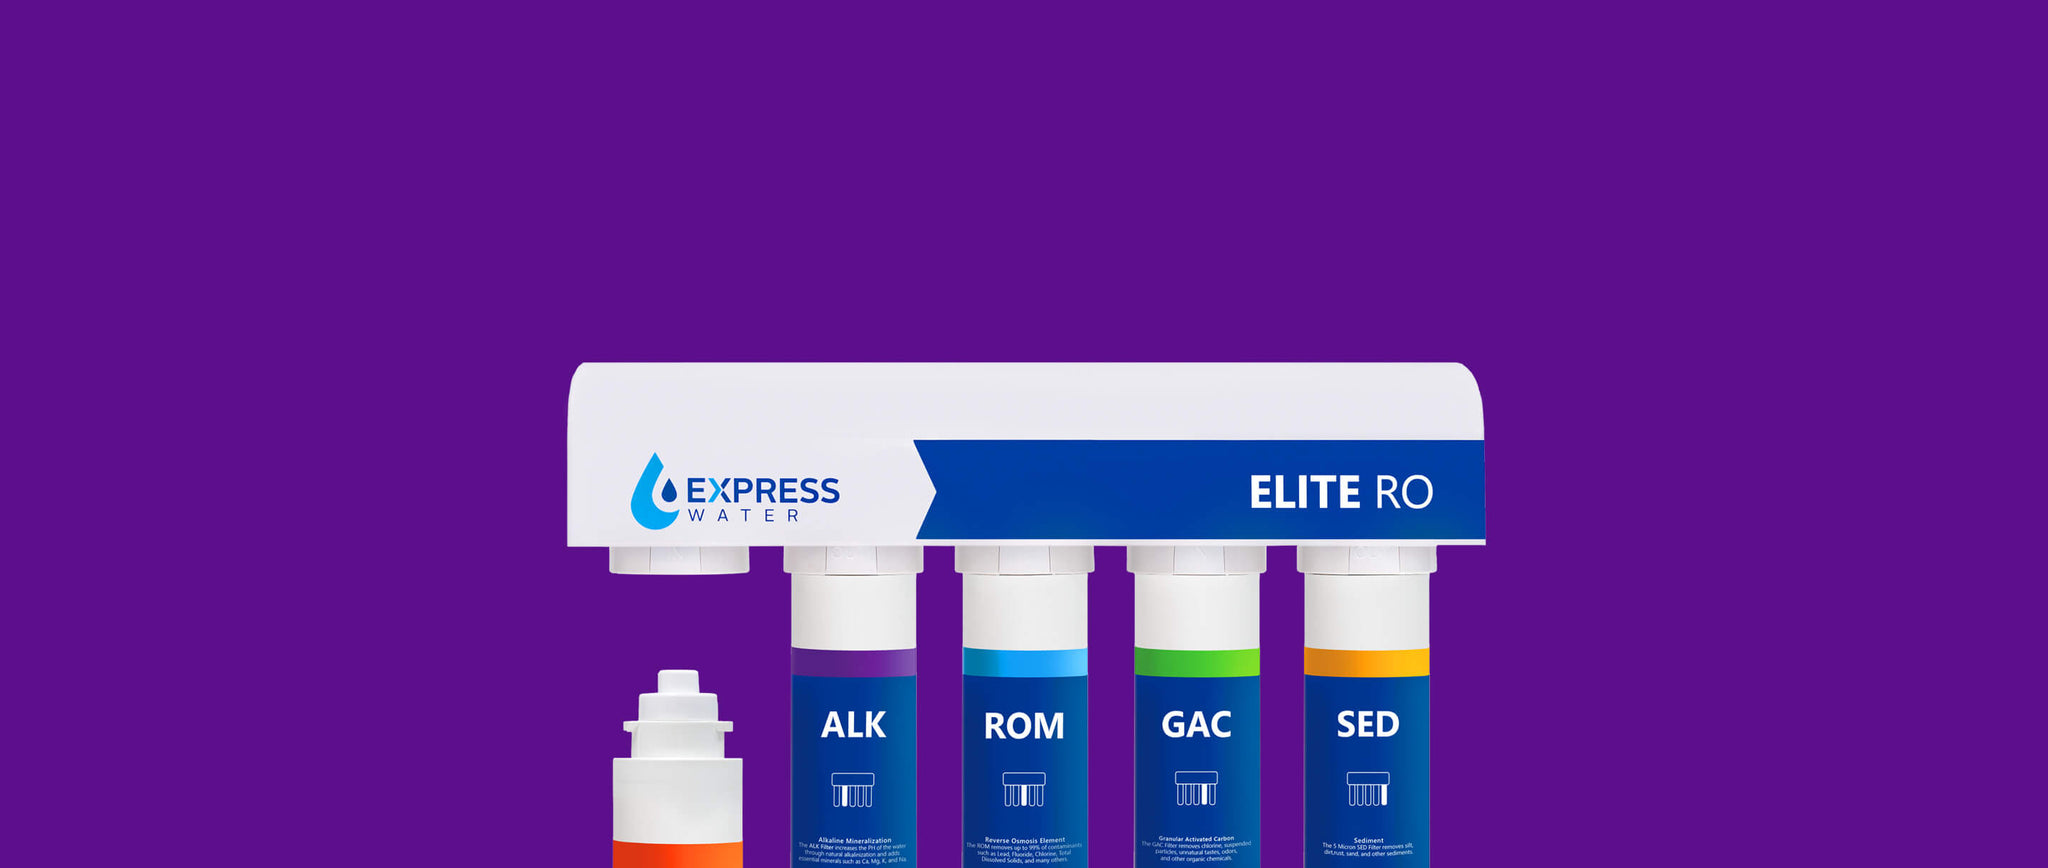 Express Water - Elite RO - Reverse Osmosis Under-Sink Water Filtration with Alkaline Mineralization and Easy Change Filters